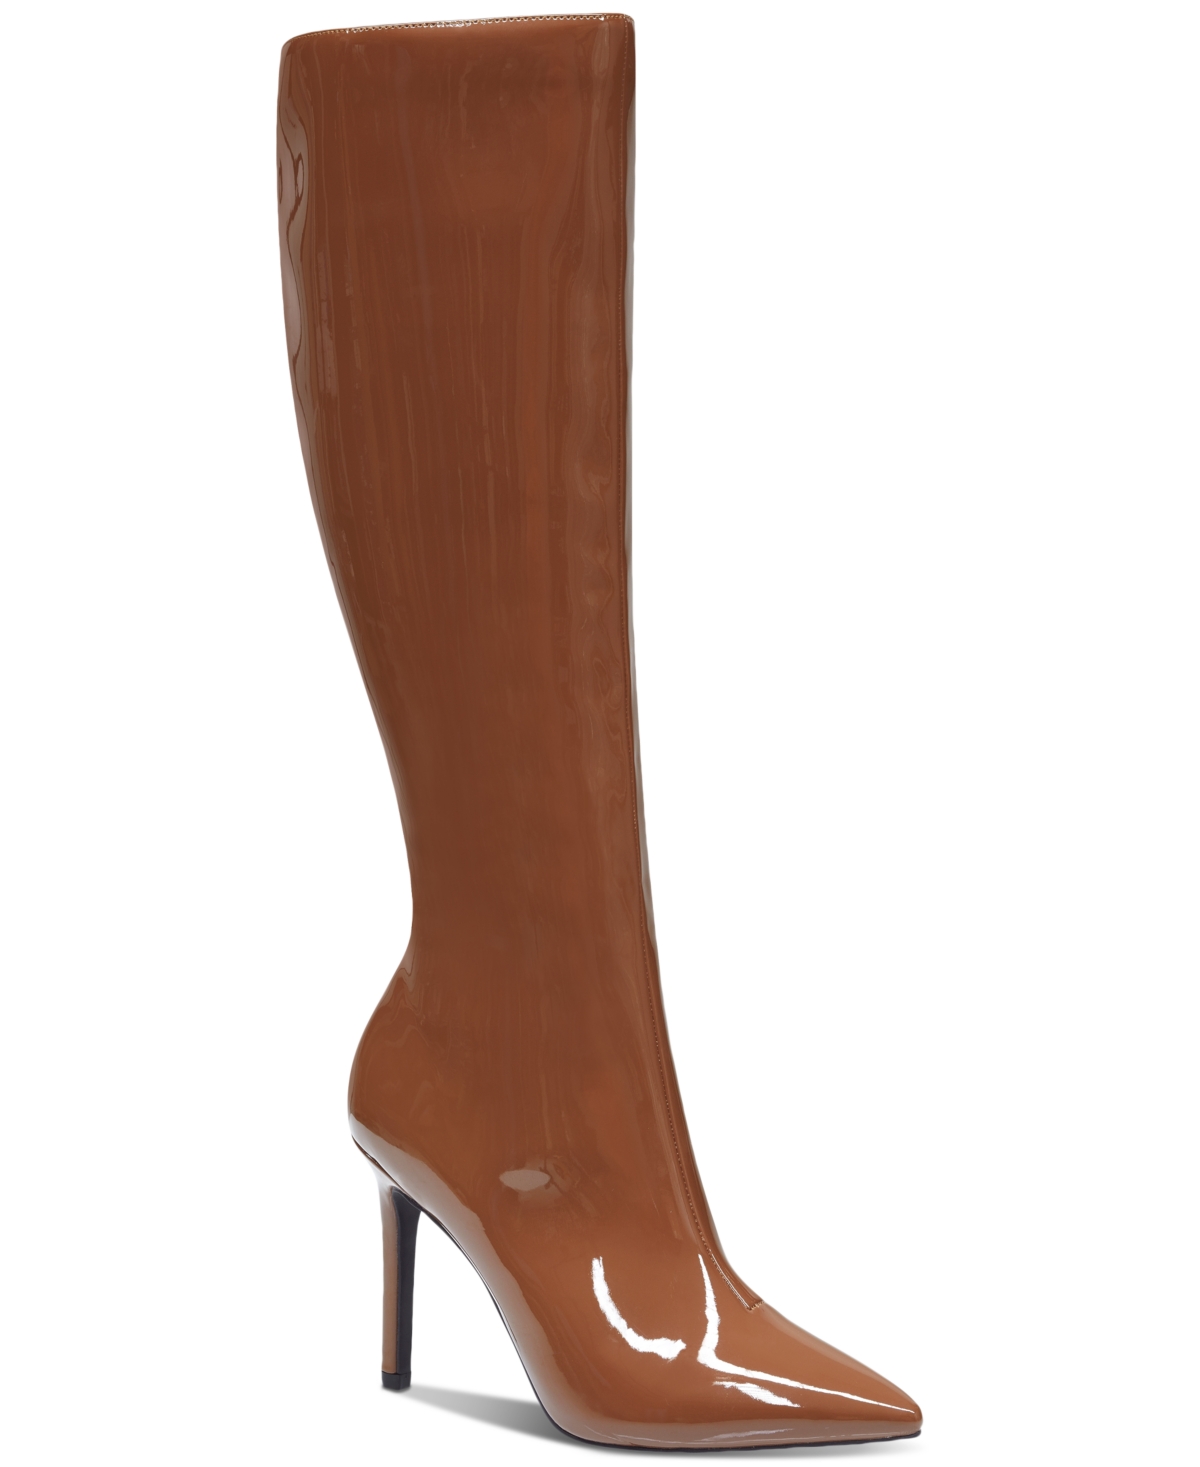 Inc International Concepts Women's Rajel Dress Boots, Created For Macy's Women's Shoes In Cognac Patent